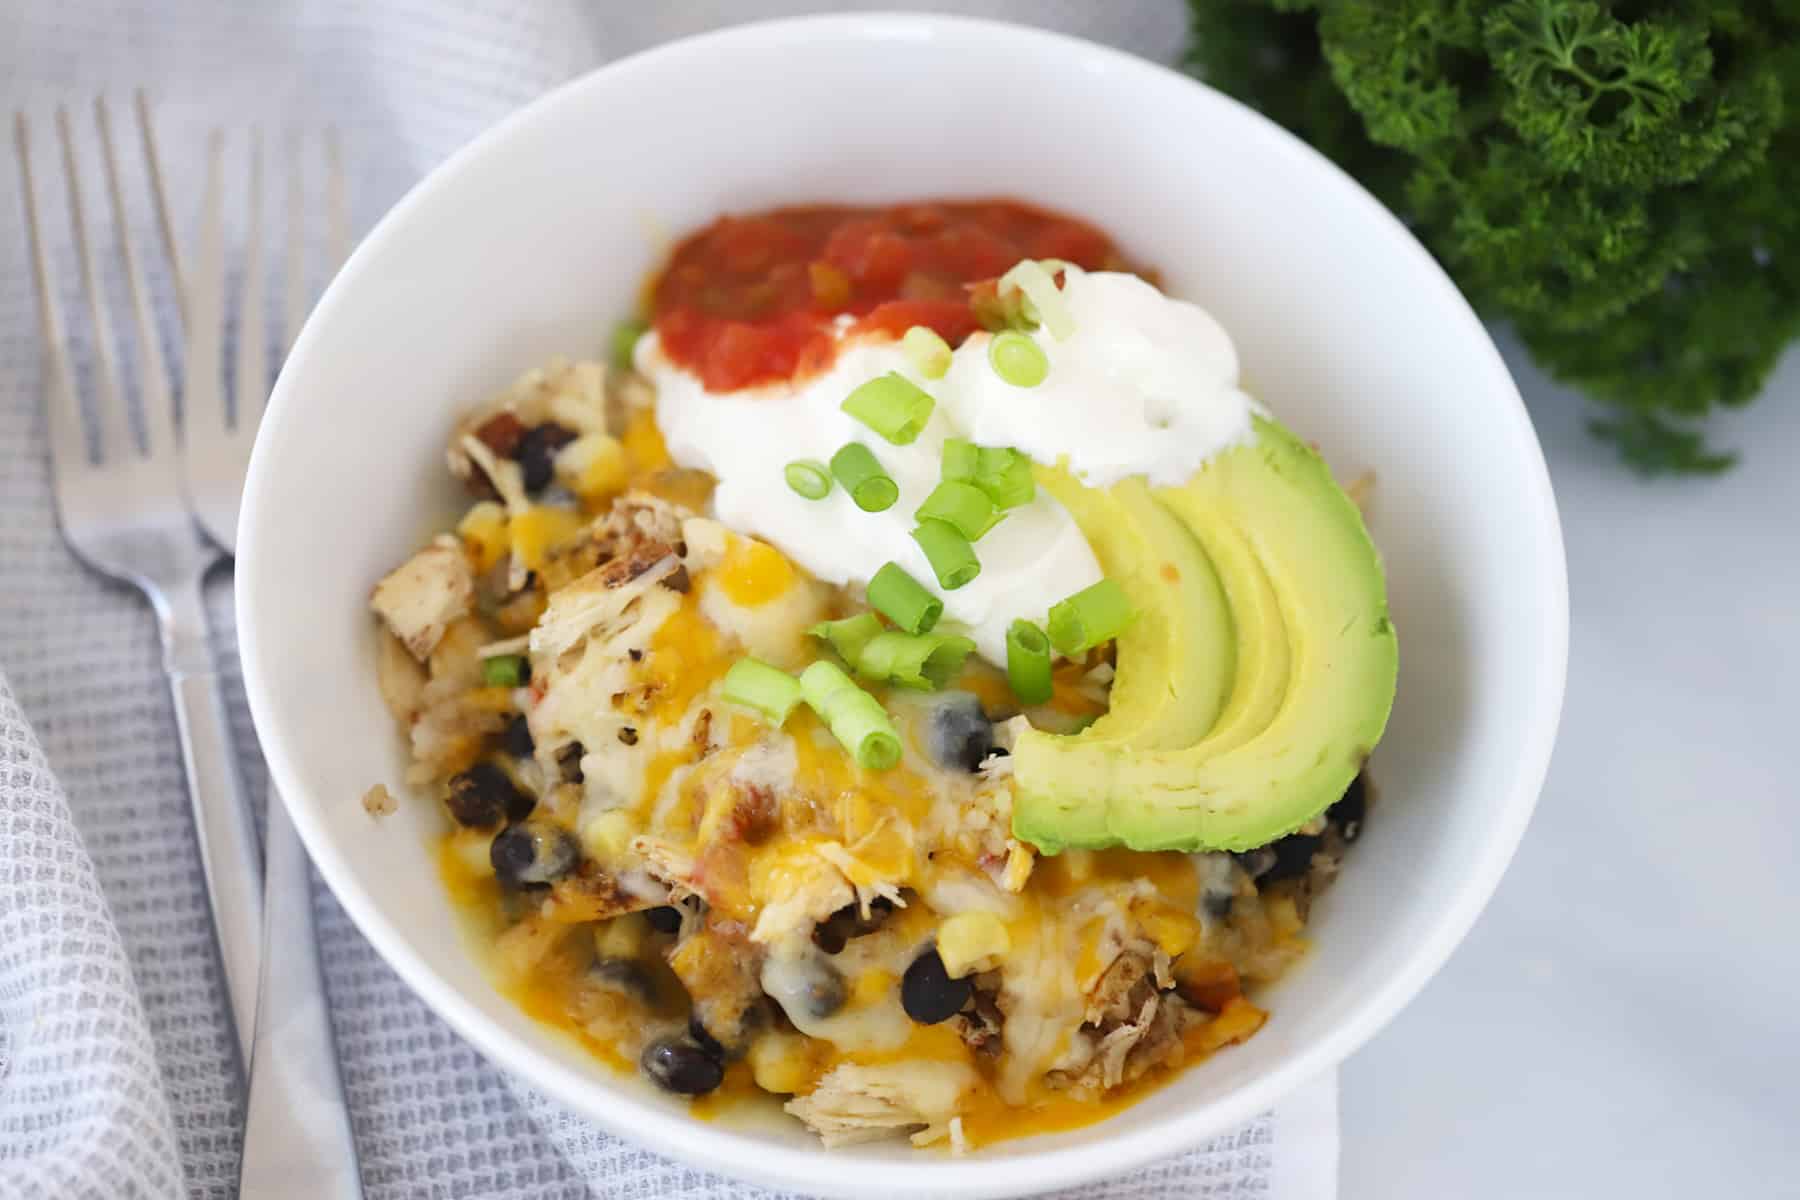 A burrito bowl filled with chicken, beans, rice and cheese, topped with sour cream, salsa, avocado and onions.